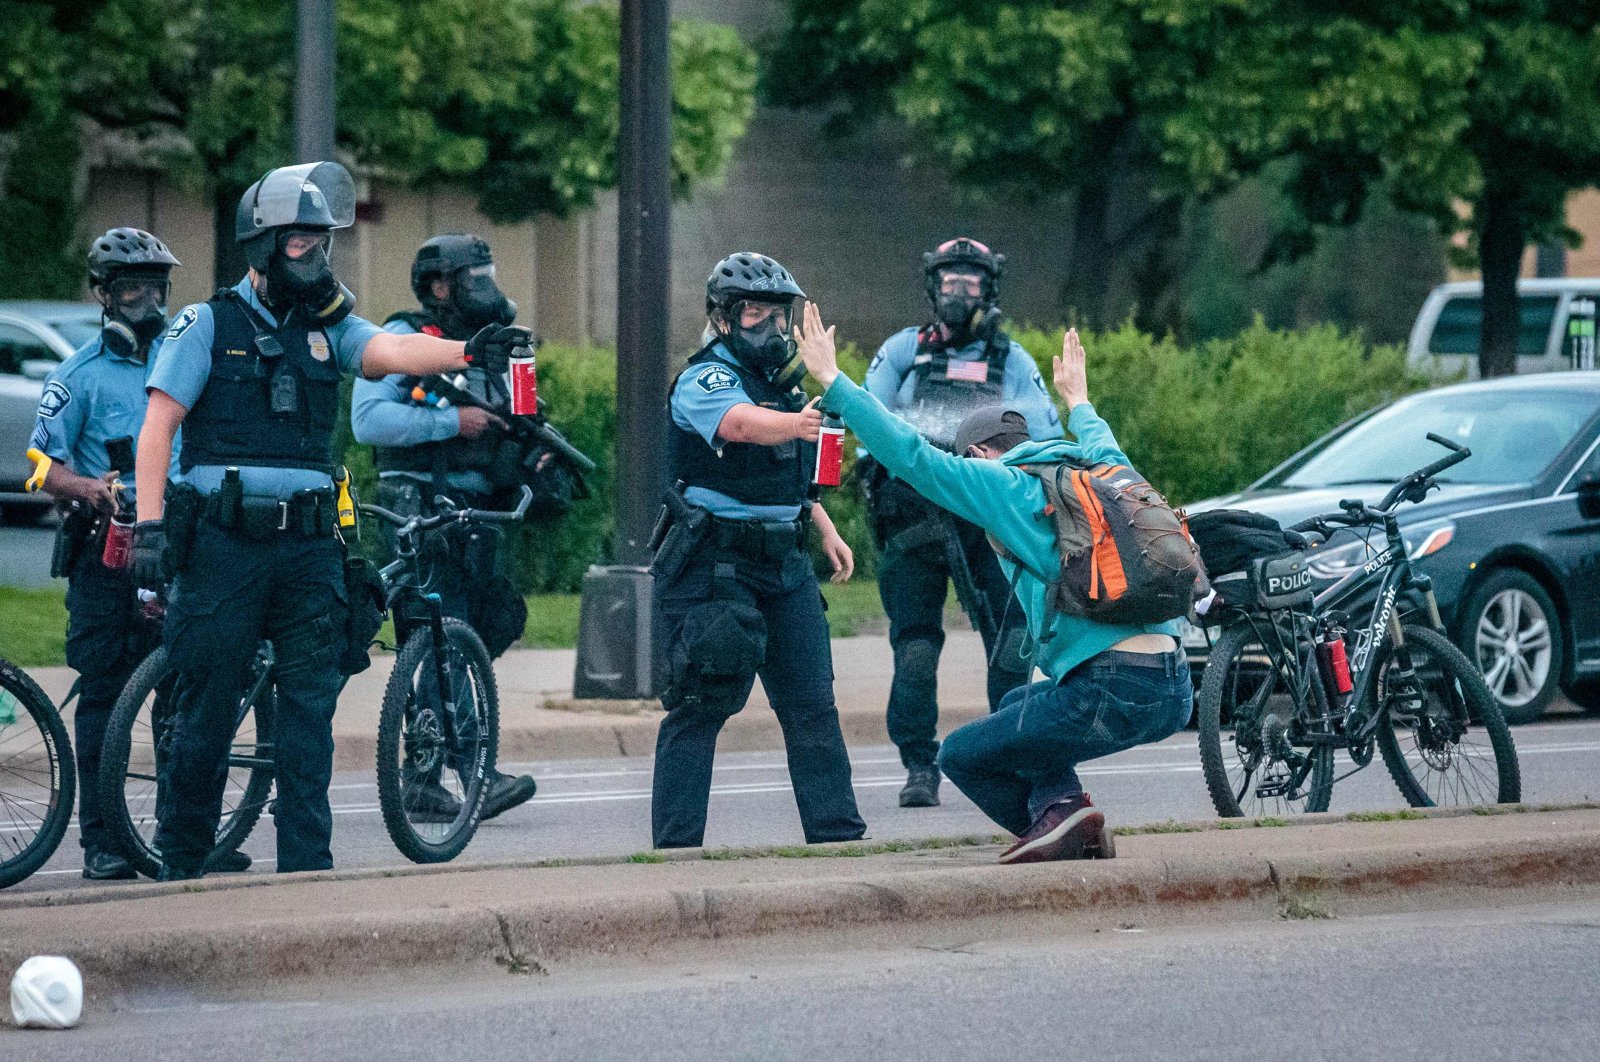 Demonstrator holds up his hands as he is sprayed with pepper spray by two Minneapolis Police officers in Minneapolis, Minnesota during a protest over the death of George Floyd, an unarmed black man who died while in police custody in Minneapolis, May 31, 2020. (AFP Photo)